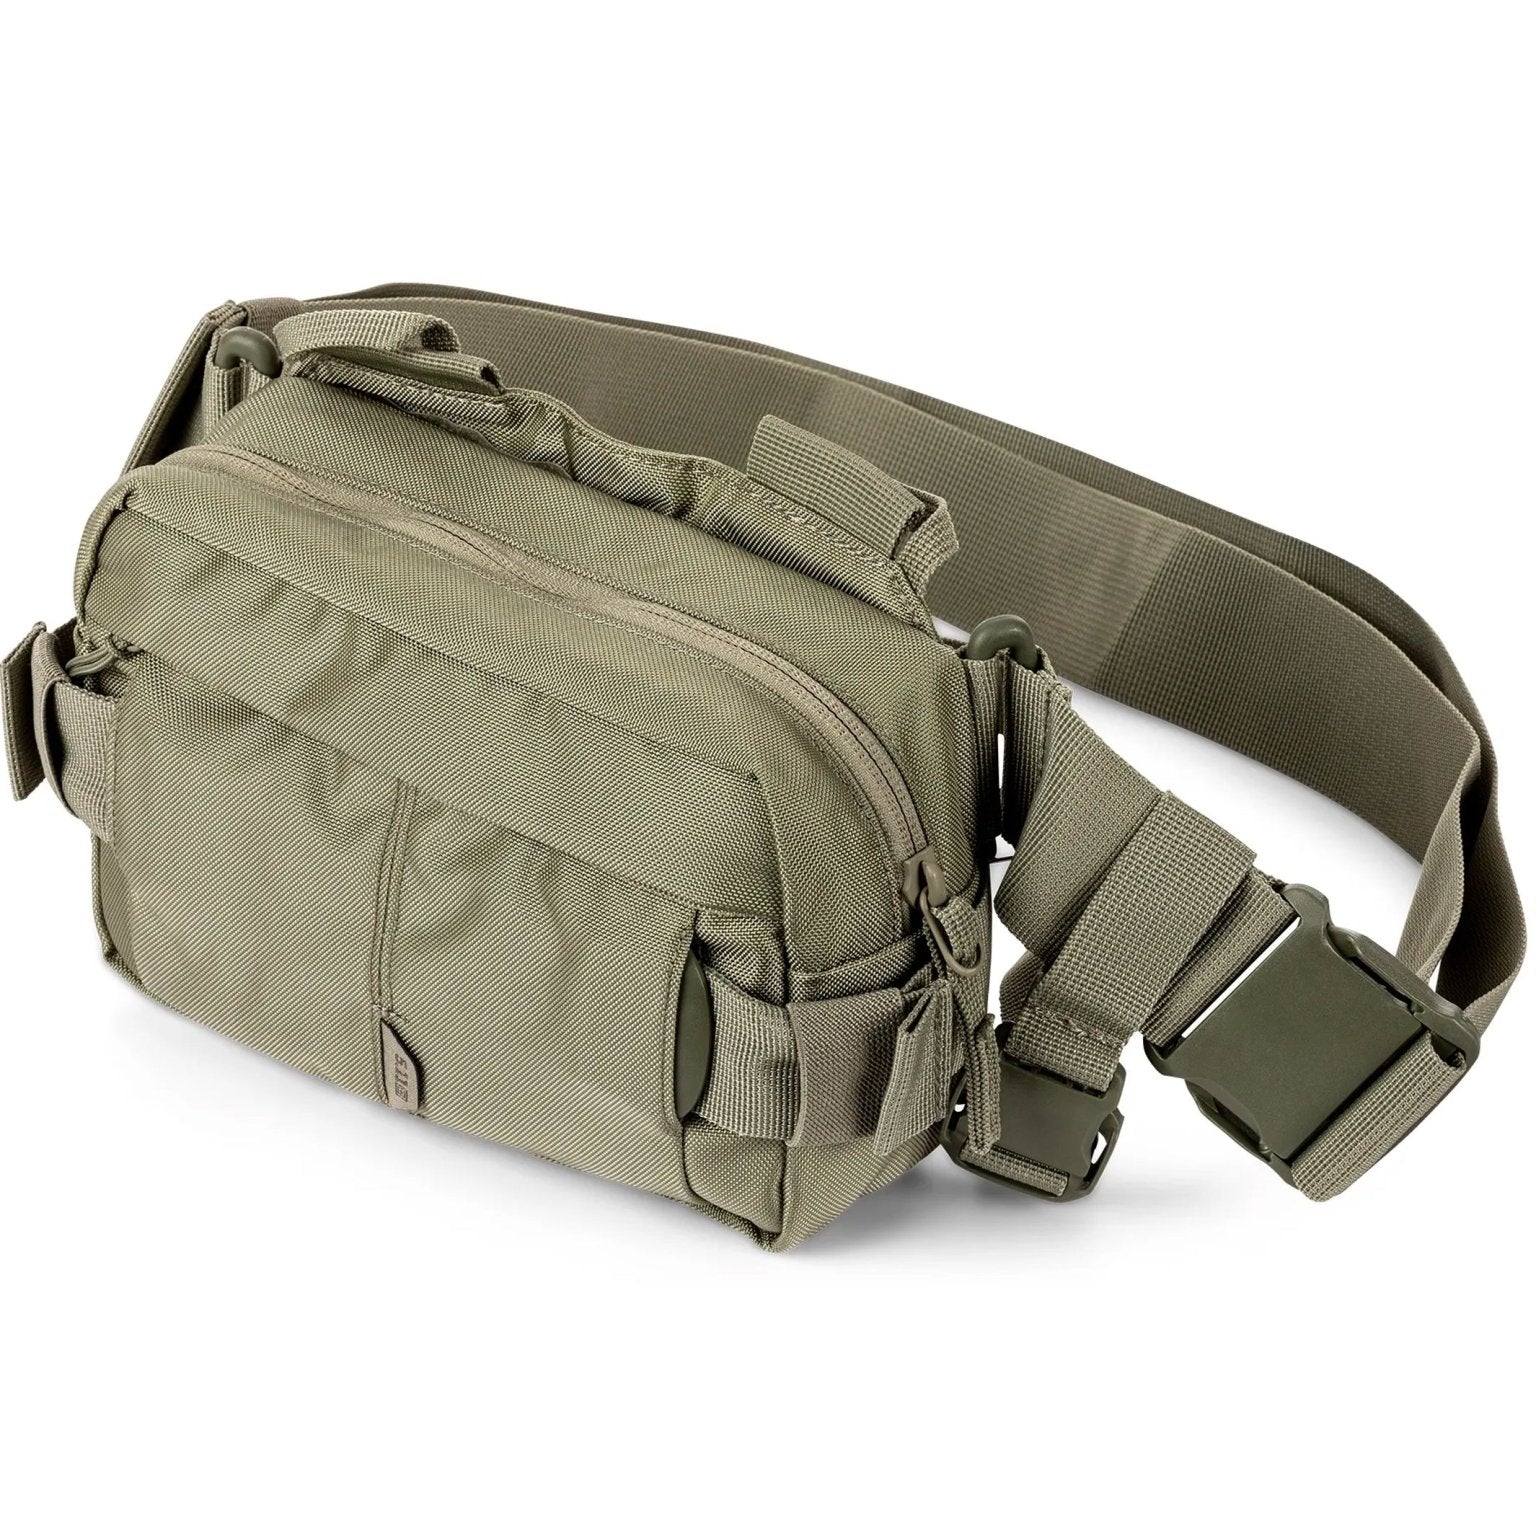 4elementsclothing5.11 Tactical5.11 Tactical - 5.11 Tactical LV6 WAIST PACK 2.0 3L - Style 56702Bag56702-256